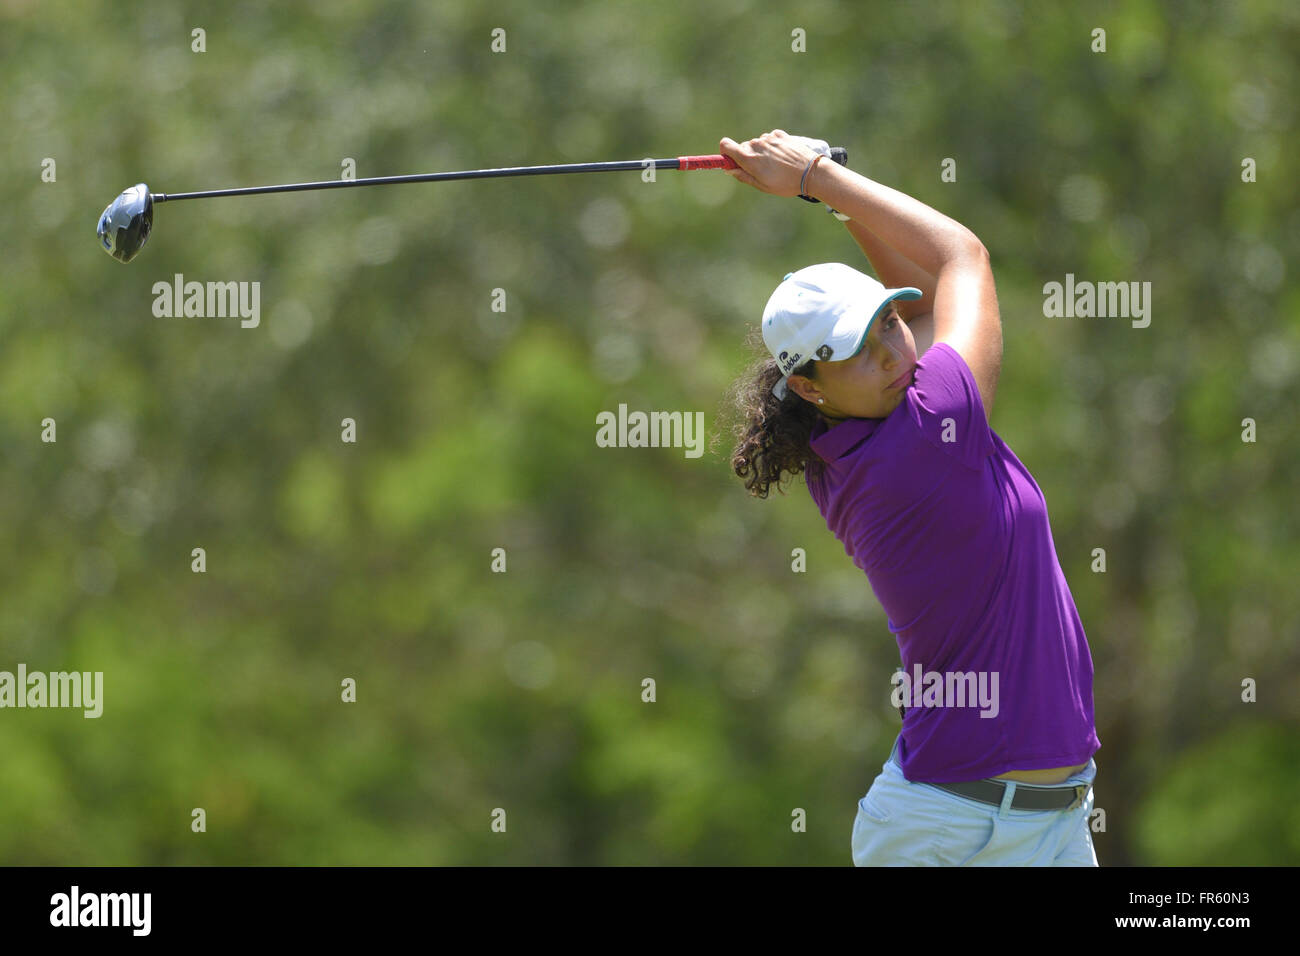 April 19, 2015 - Fort Myers, Florida, USA - Emily Tubert during the final round of the Chico's Patty Berg Memorial on April 19, 2015 in Fort Myers, Florida. The tournament feature golfers from both the Symetra and Legends Tours...ZUMA Press/Scott A. Miller (Credit Image: © Scott A. Miller via ZUMA Wire) Stock Photo